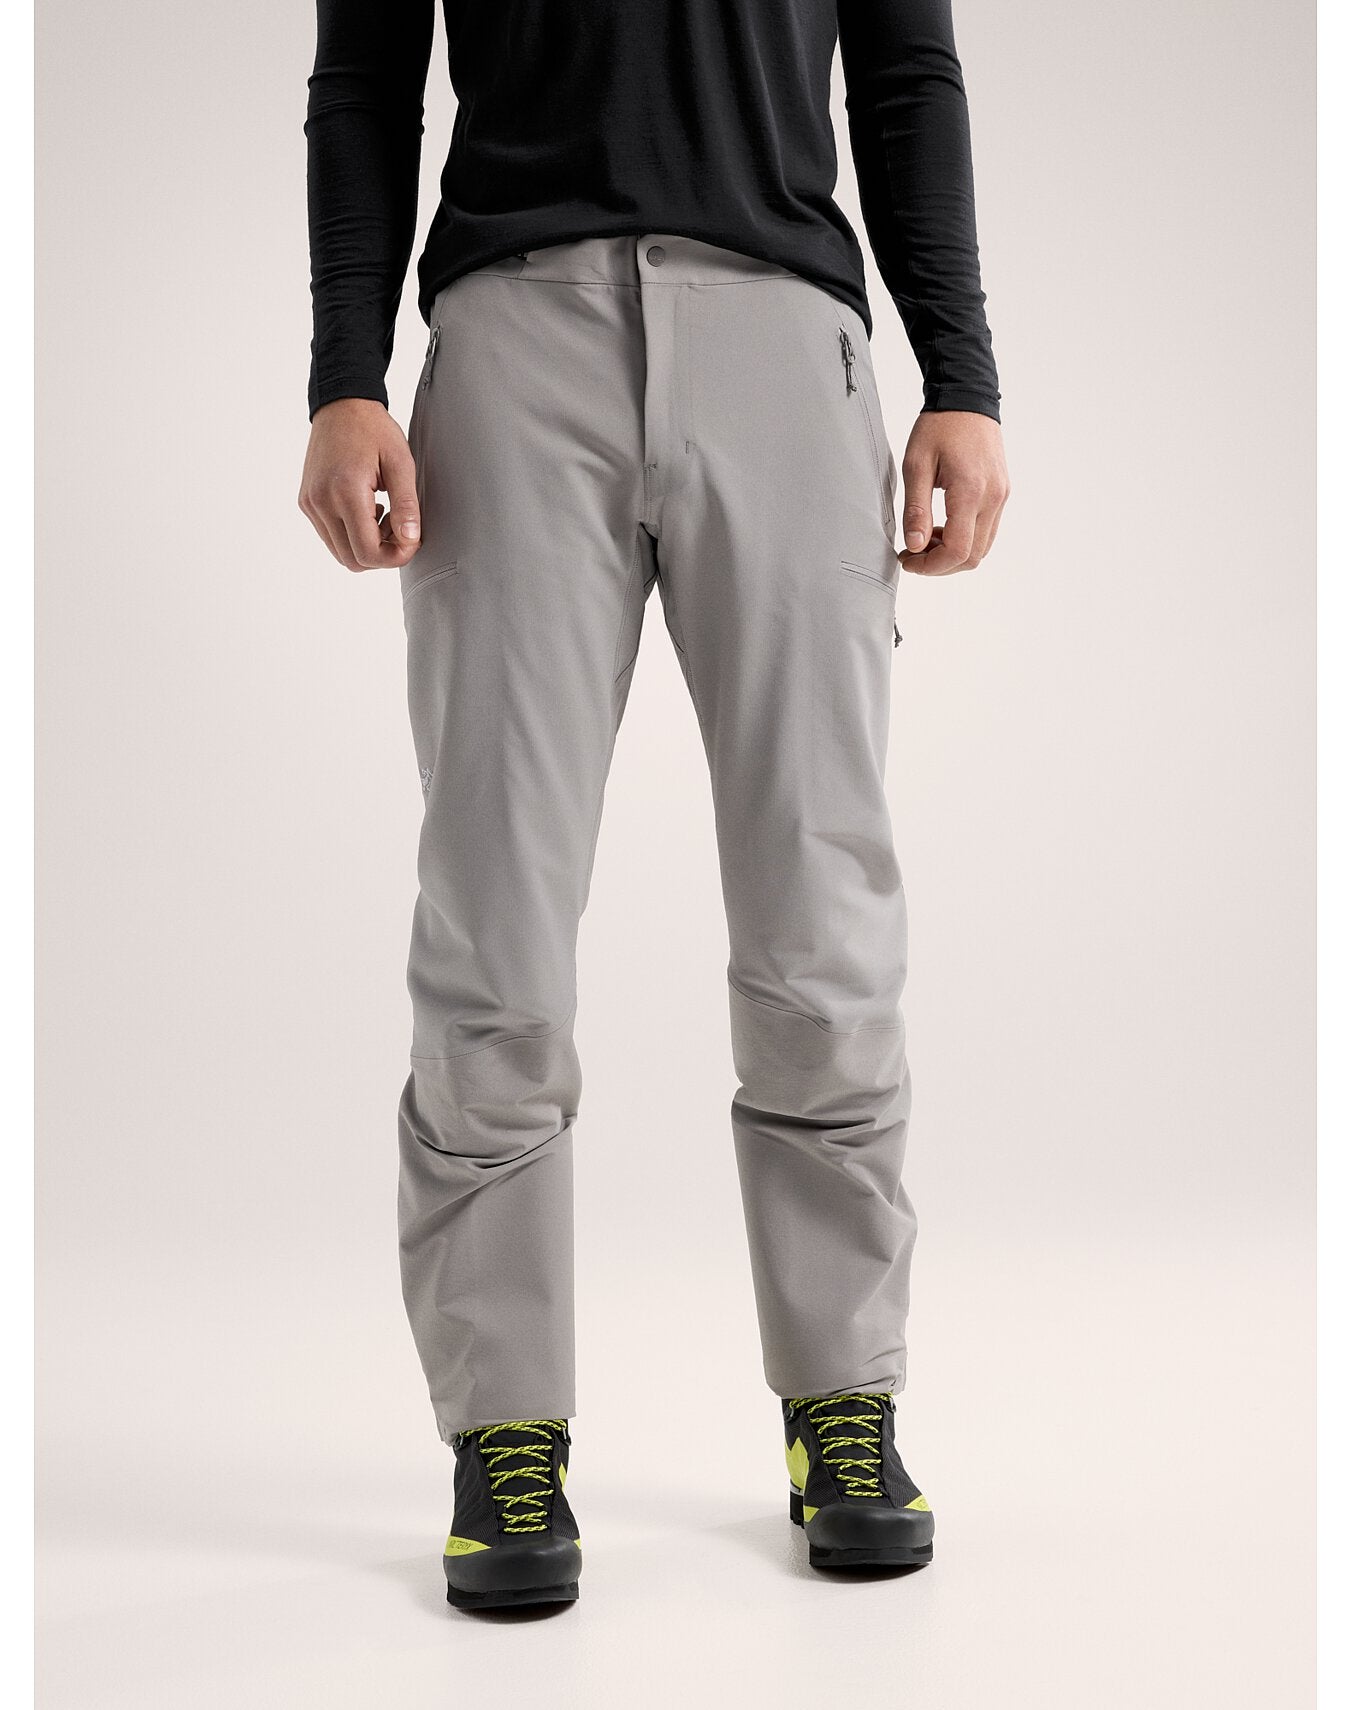 S24-X000006823-Gamma-Guide-Pant-Void-Front-View.jpg